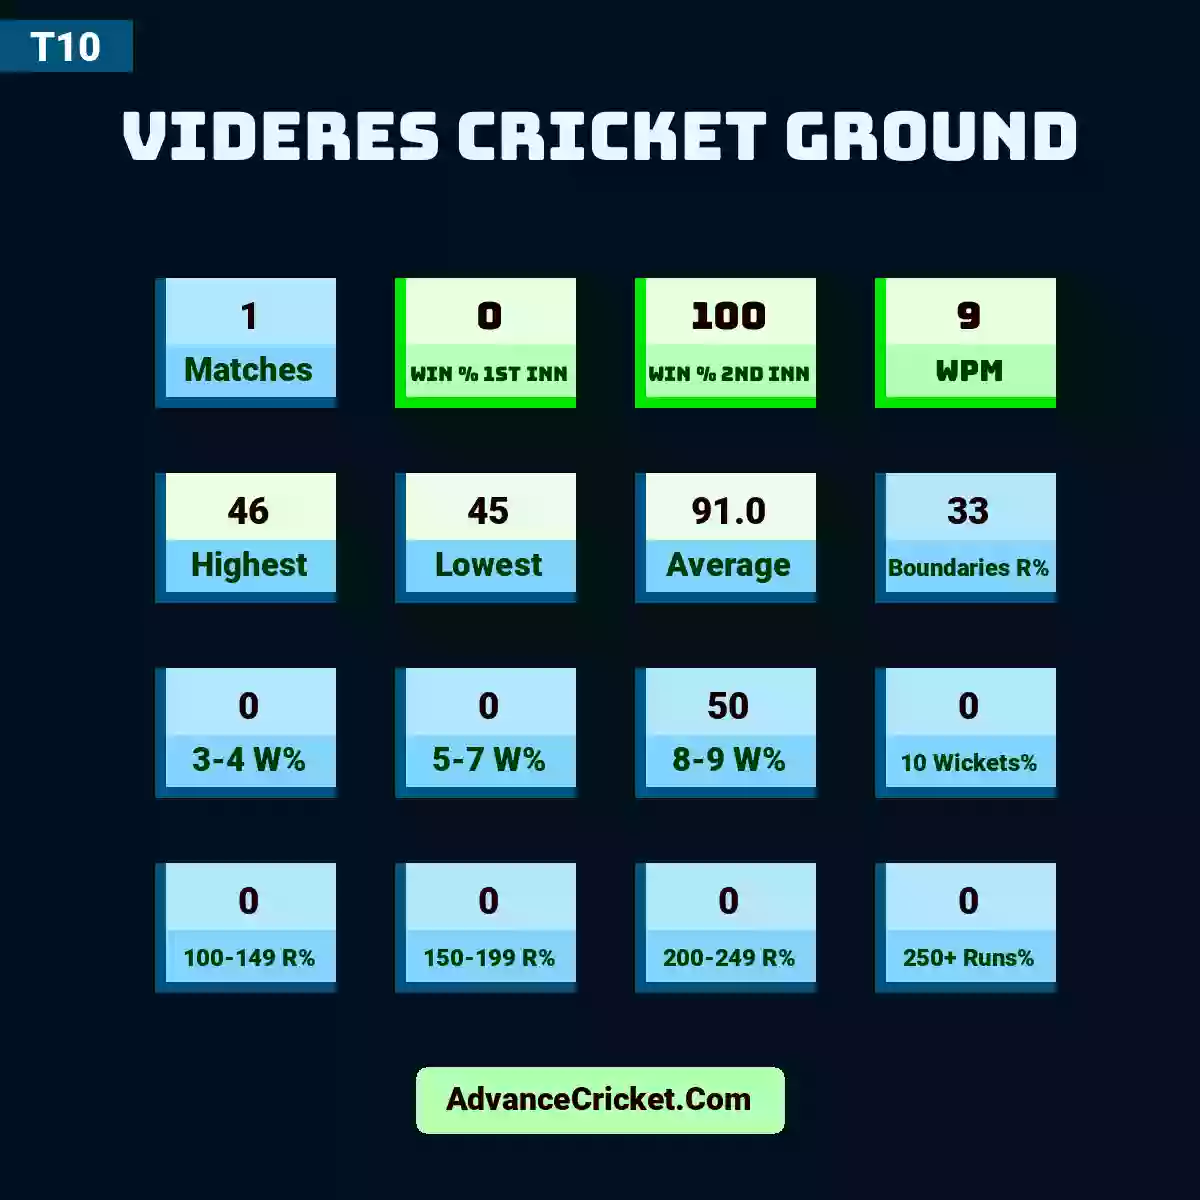 Image showing Videres Cricket Ground with Matches: 1, Win % 1st Inn: 0, Win % 2nd Inn: 100, WPM: 9, Highest: 46, Lowest: 45, Average: 91.0, Boundaries R%: 33, 3-4 W%: 0, 5-7 W%: 0, 8-9 W%: 50, 10 Wickets%: 0, 100-149 R%: 0, 150-199 R%: 0, 200-249 R%: 0, 250+ Runs%: 0.